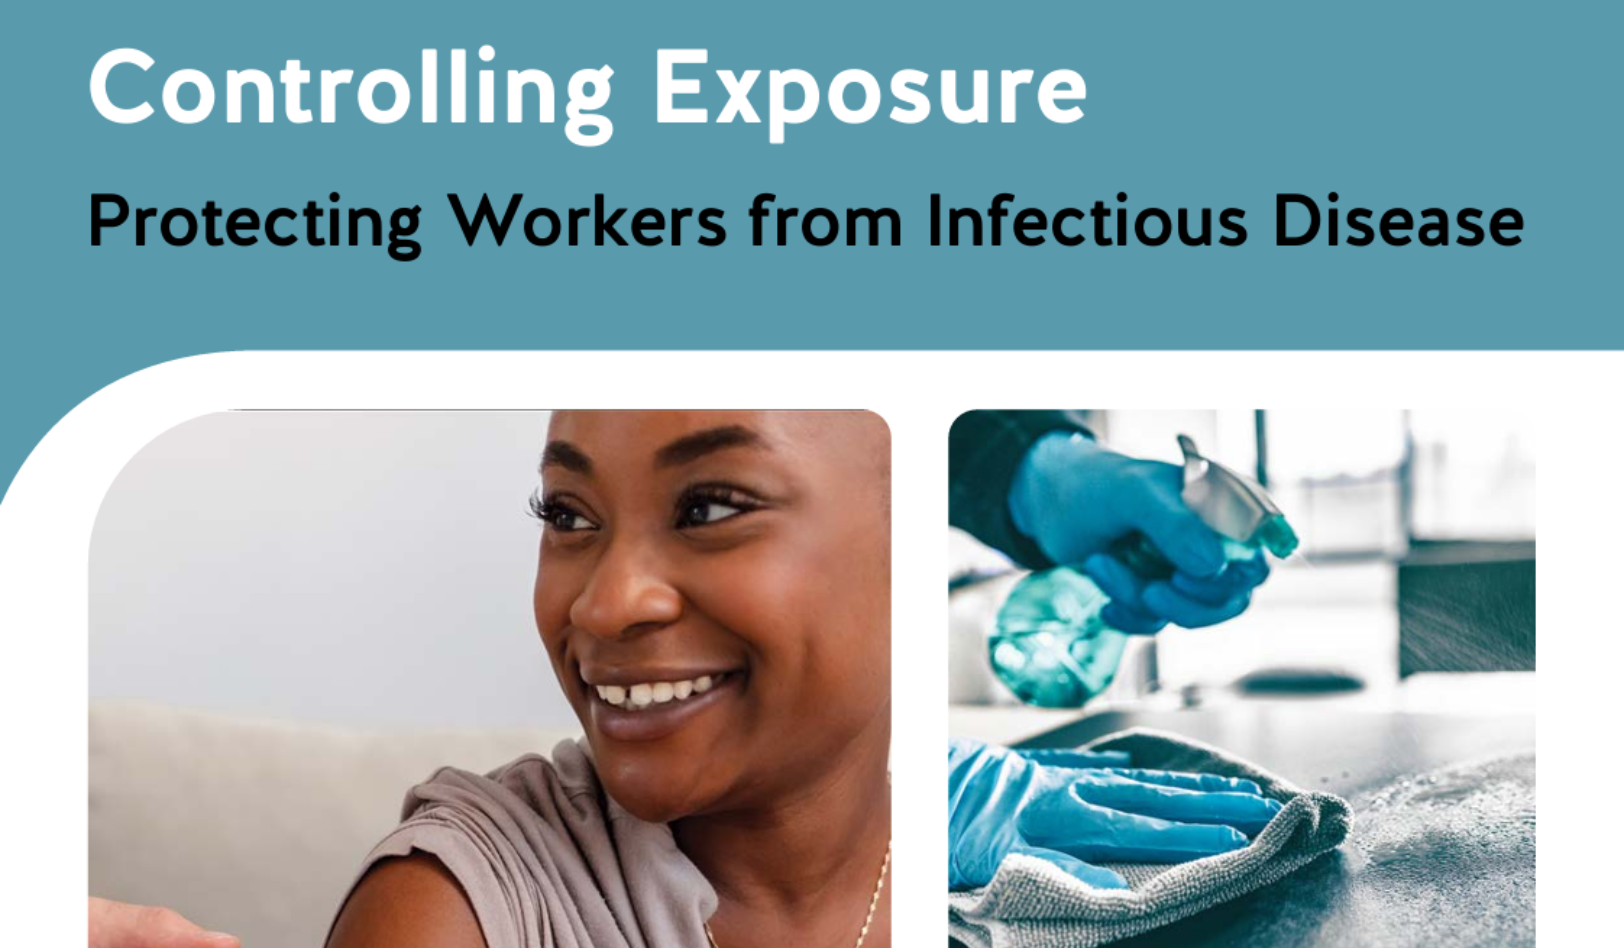 Controlling Exposure: Protecting Workers from Infectious Disease